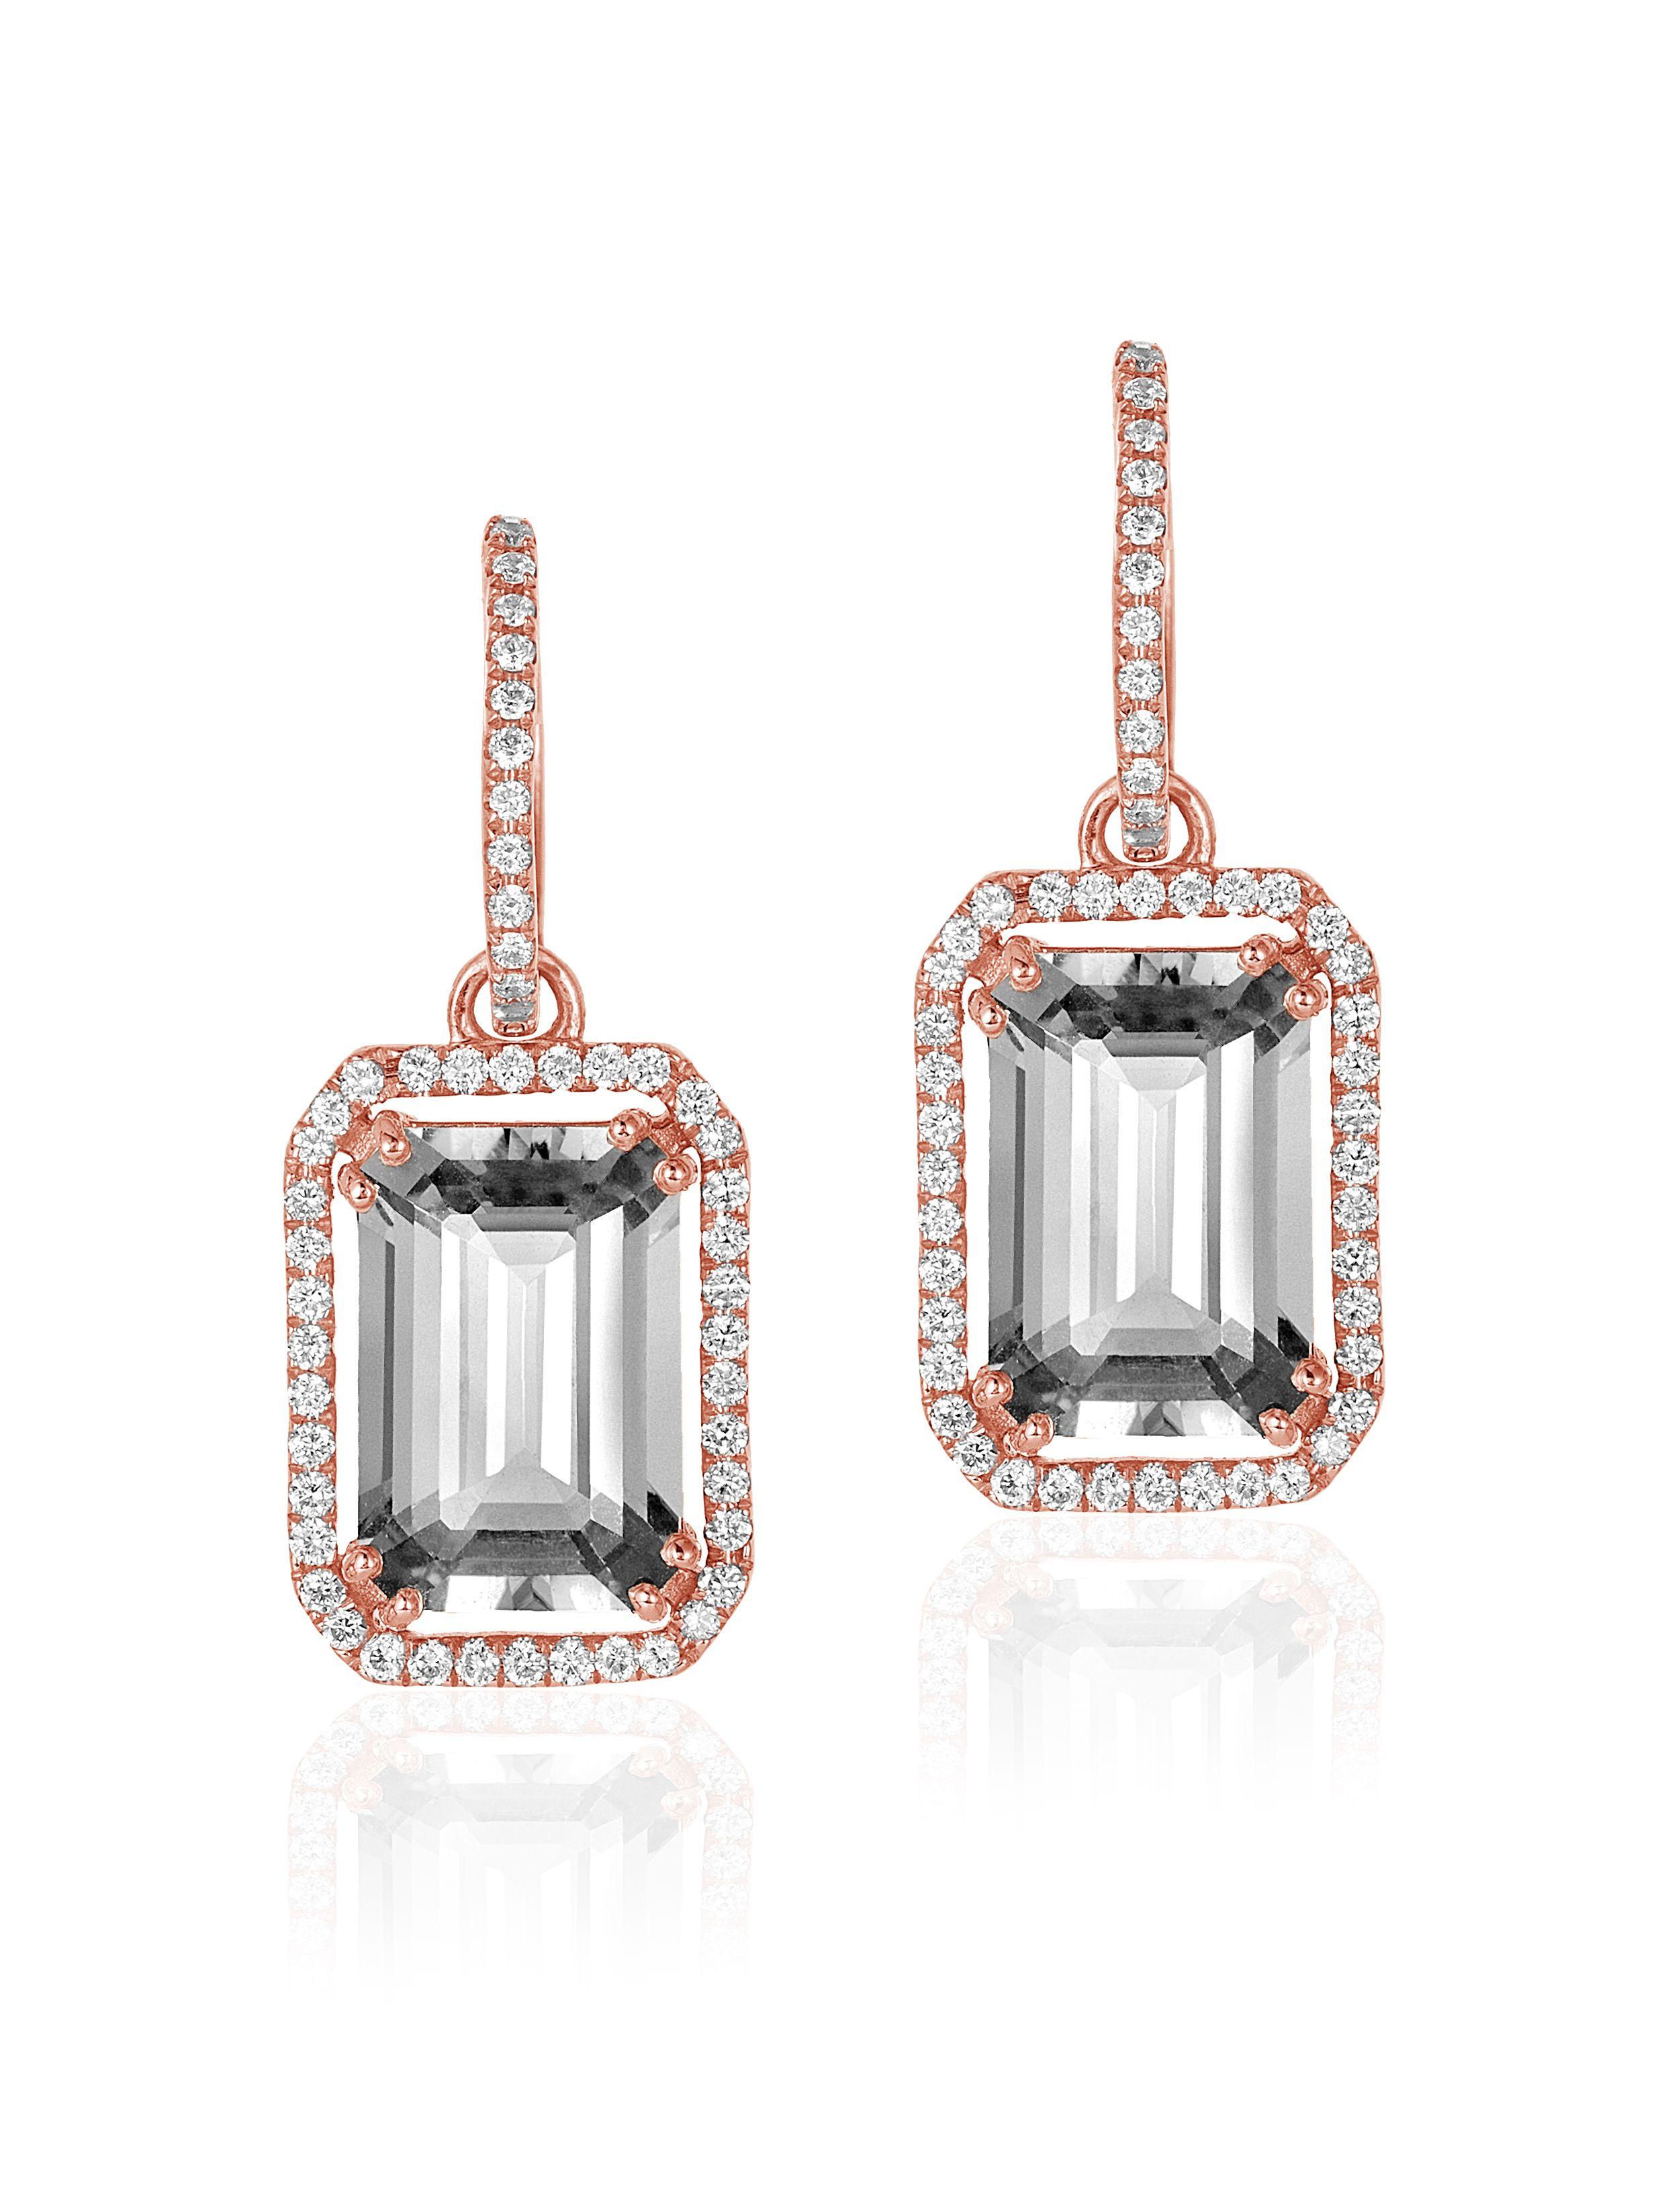 Rock Crystal Emerald Cut Earrings with Diamond Trim in 18K Rose Gold, from ‘Gossip” Collection

Stone Size: 12 x 8 mm 

Gemstone Approx. Wt: Rock Crystal- 7.12 Carats

Diamonds: G-H / VS, Approx. Wt: 0.40 Carats